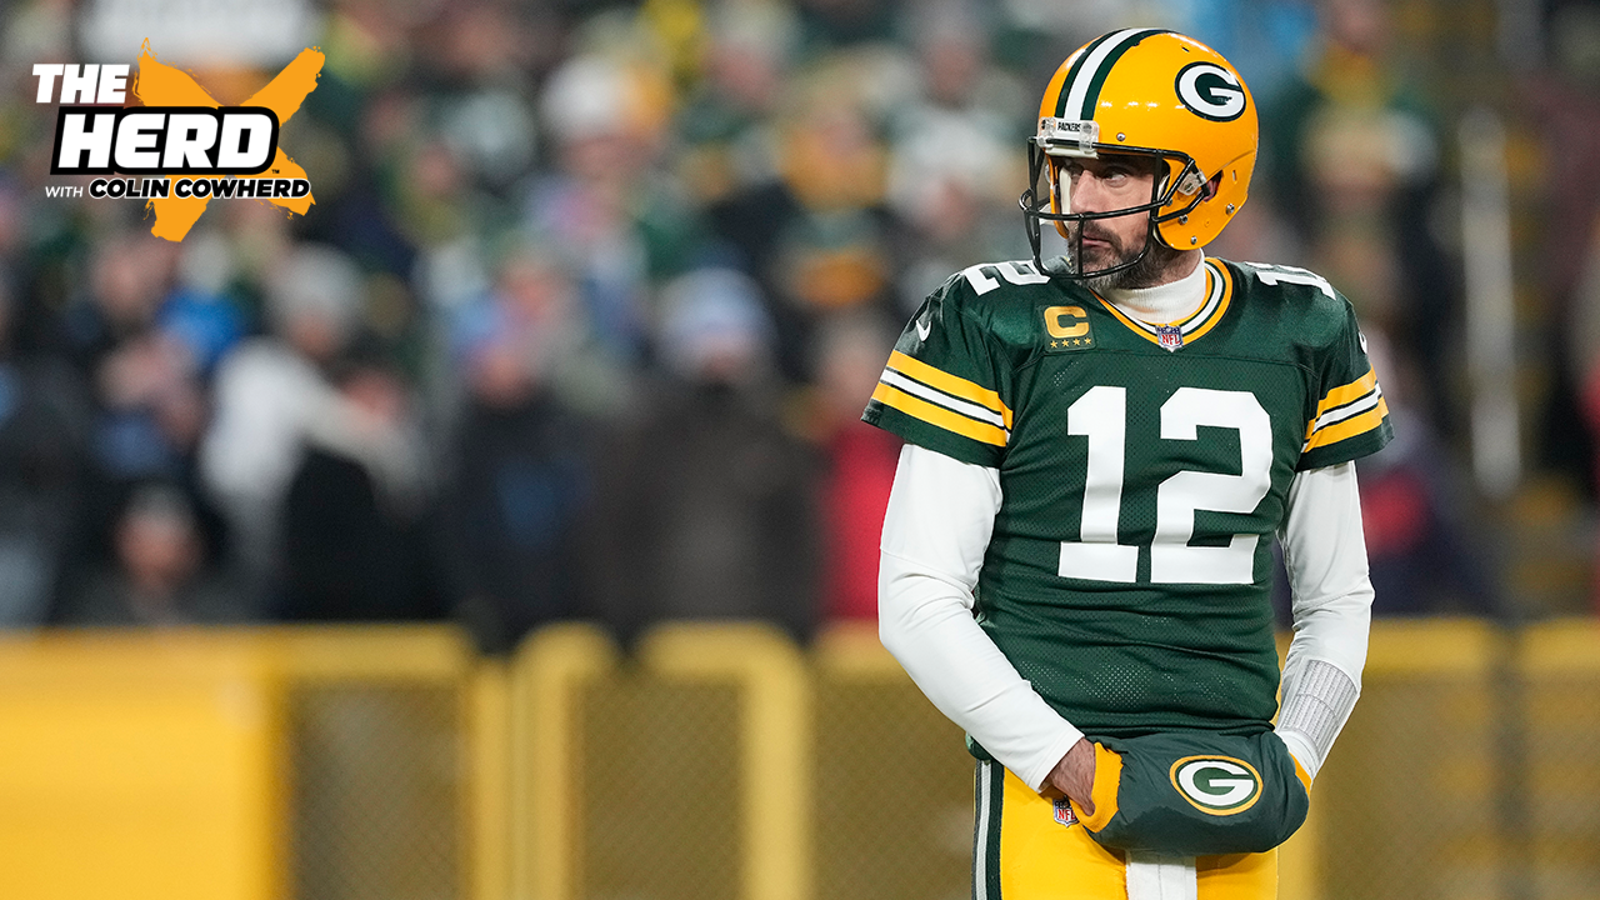 Has Rodgers played his final game in Green Bay?